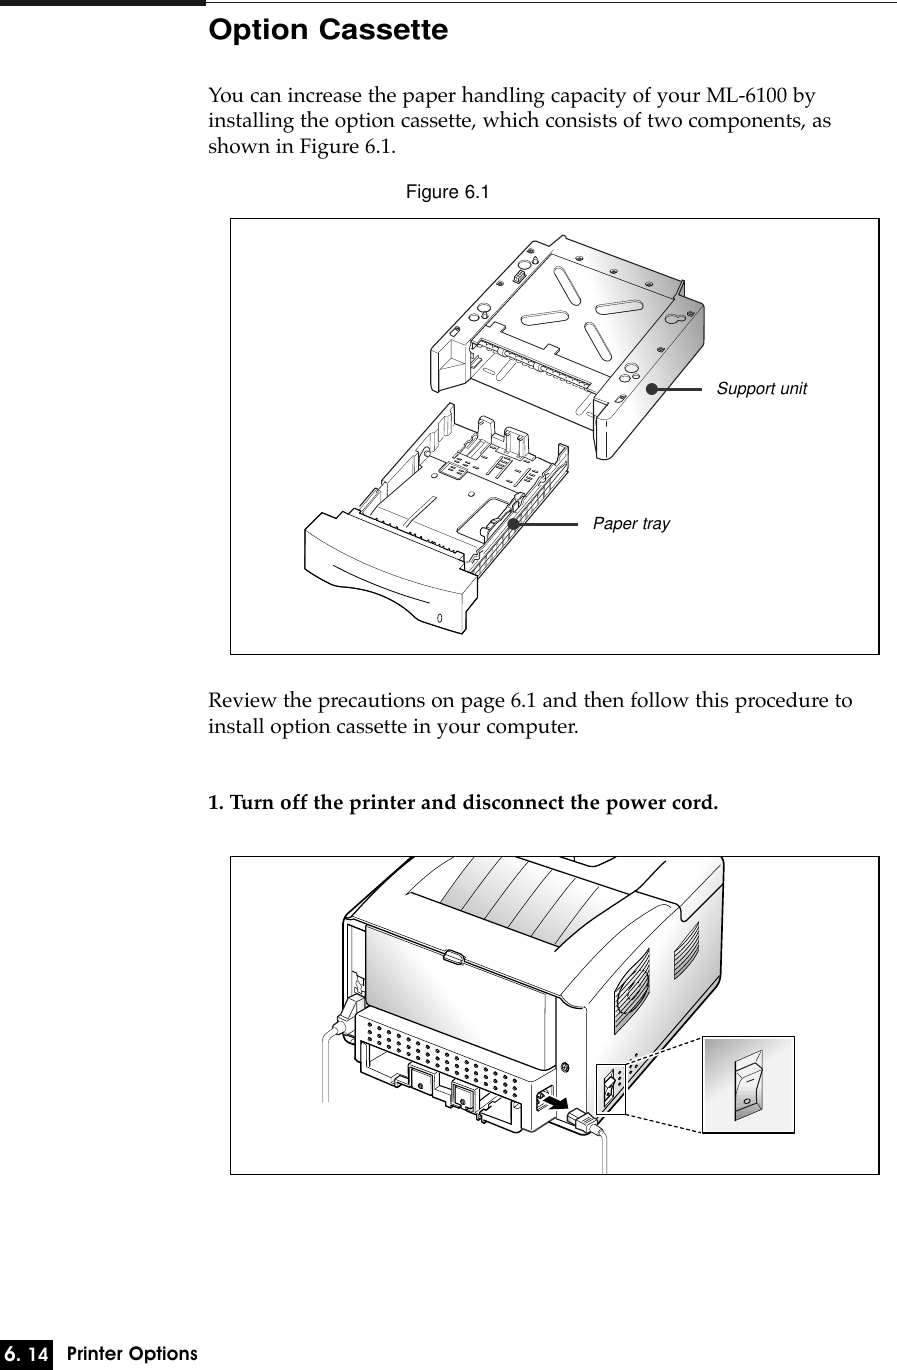 6. 14Printer OptionsOption CassetteYou can increase the paper handling capacity of your ML-6100 byinstalling the option cassette, which consists of two components, asshown in Figure 6.1.Review the precautions on page 6.1 and then follow this procedure toinstall option cassette in your computer.1. Turn off the printer and disconnect the power cord.Support unitPaper trayFigure 6.1